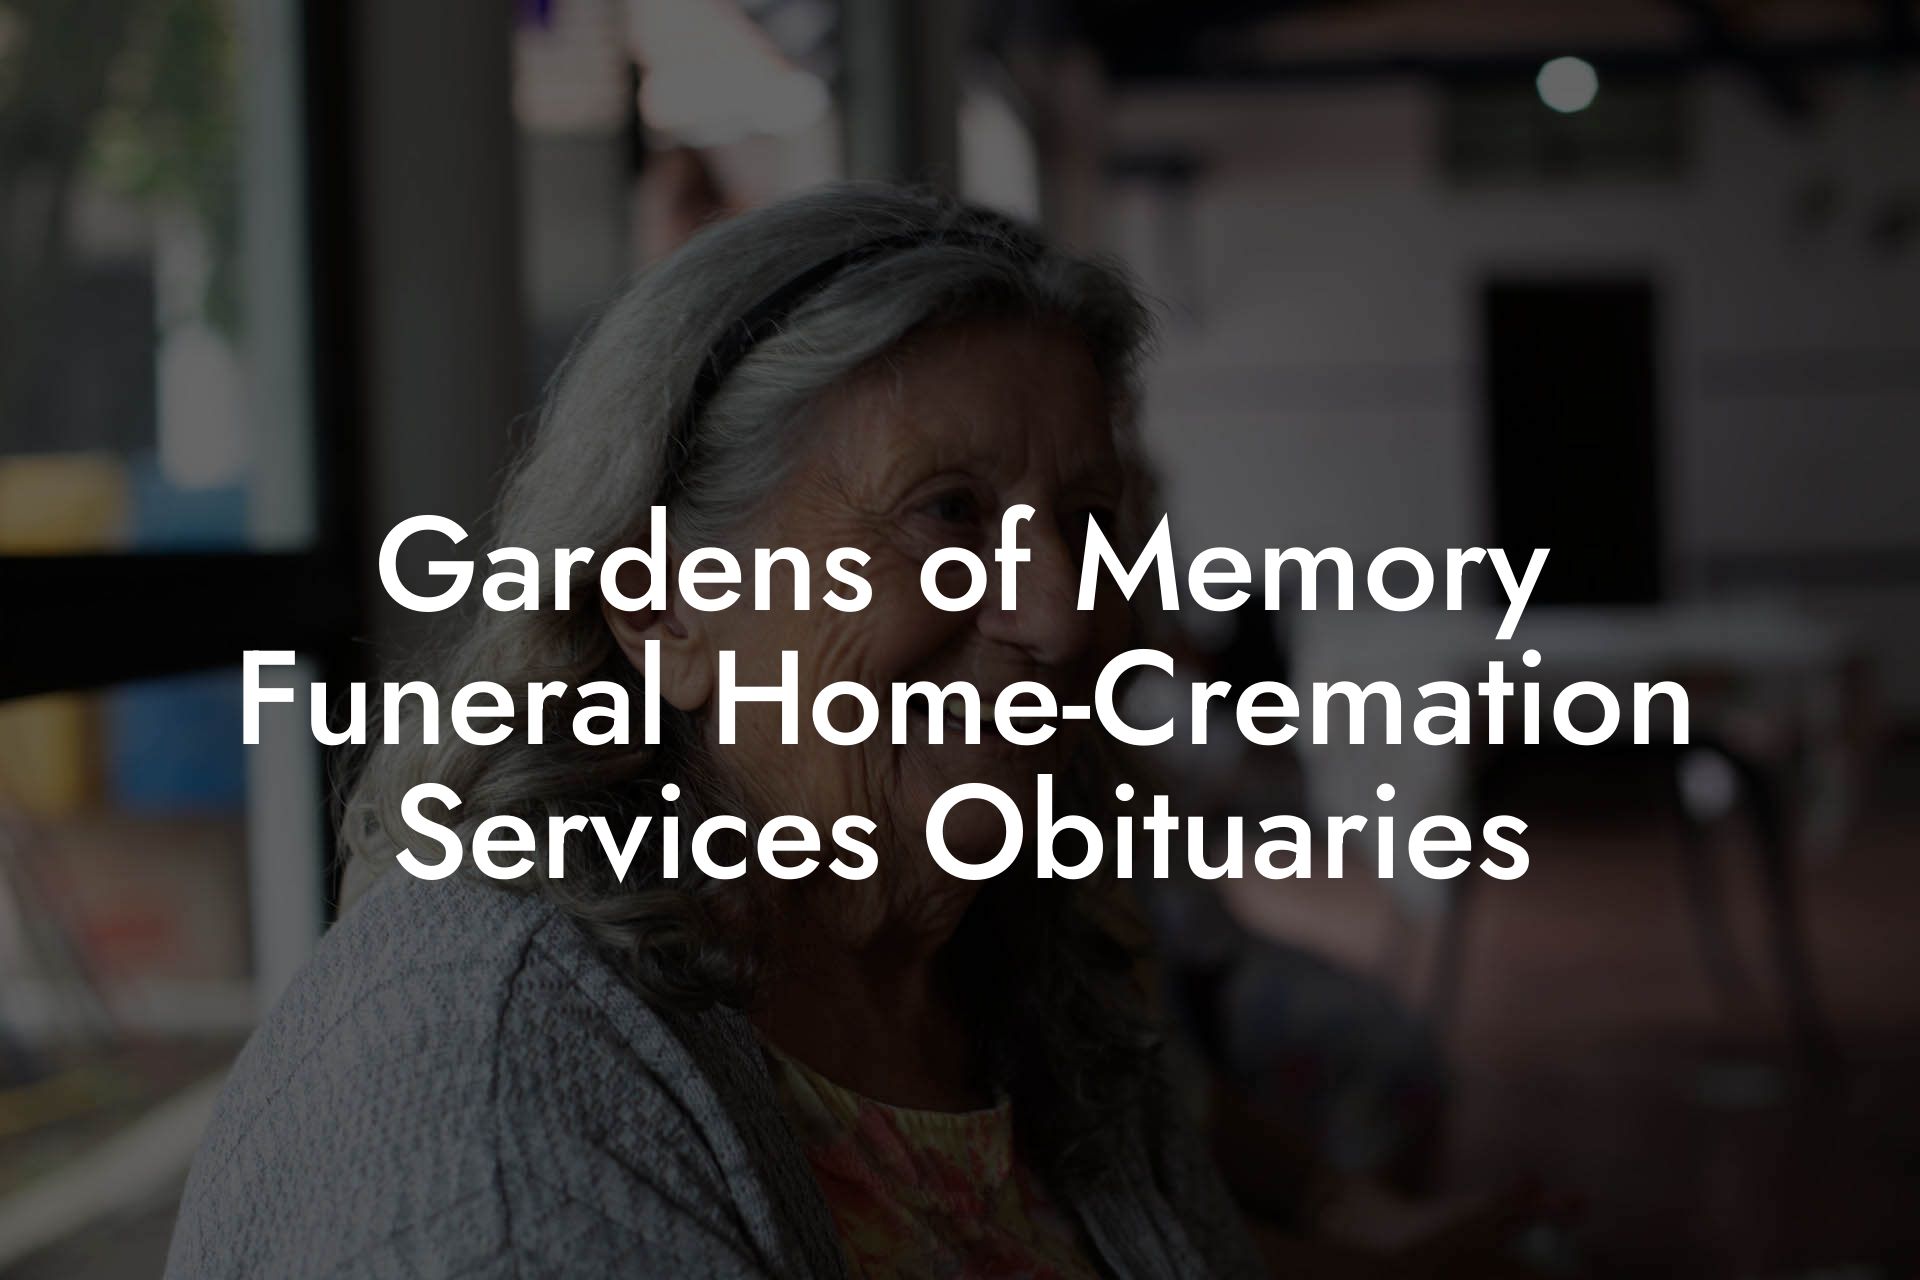 Gardens of Memory Funeral Home-Cremation Services Obituaries